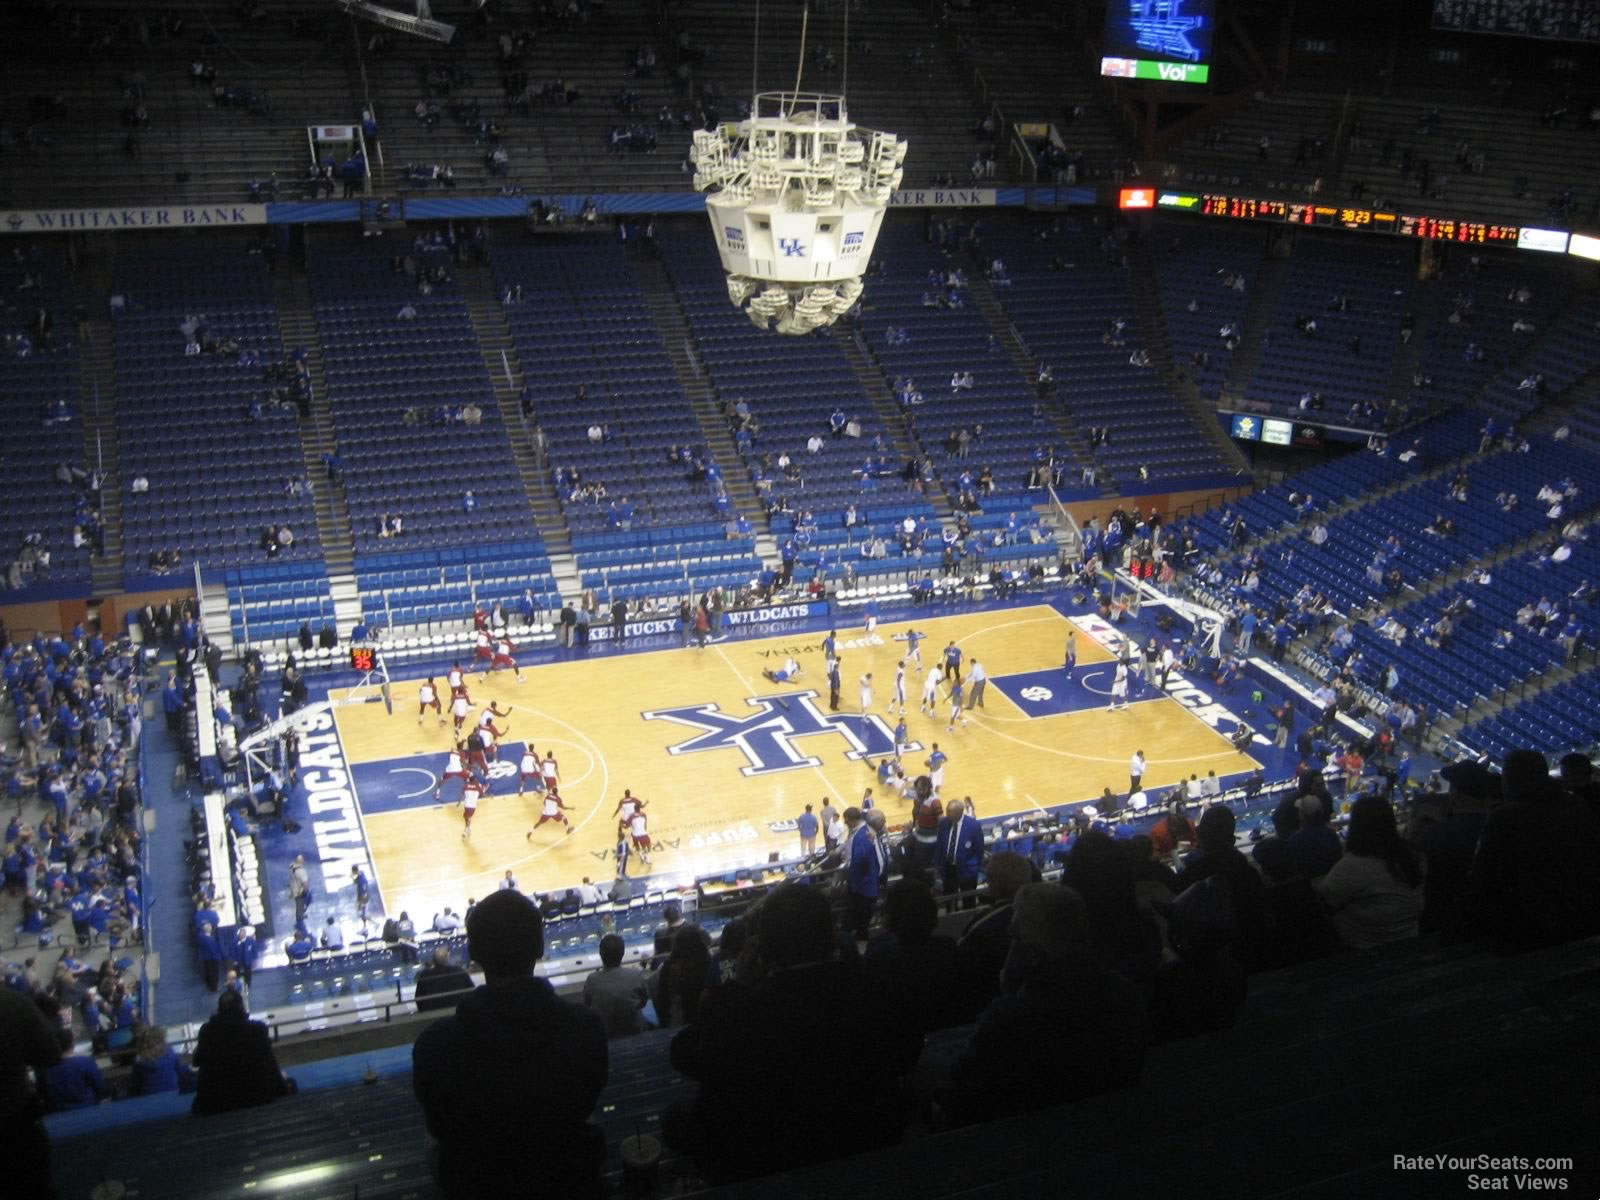 section 232, row cc seat view  for basketball - rupp arena